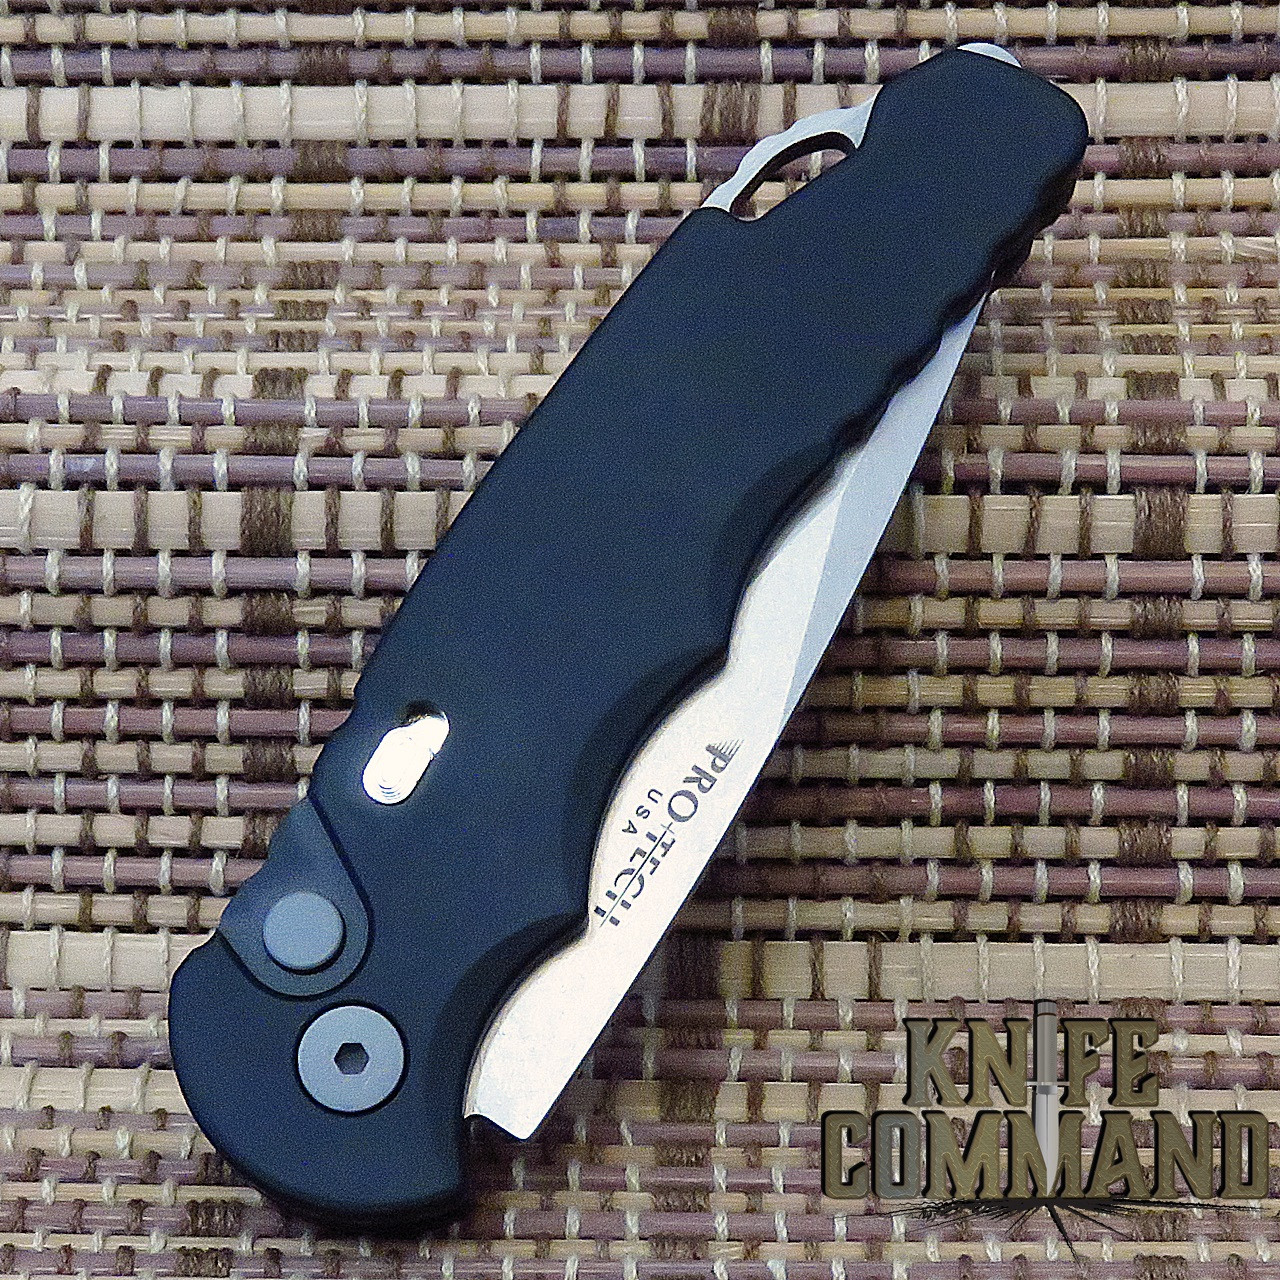 Pro-Tech Knives T501 Tactical Response TR-5 Automatic Knife Police Law Enforcement Folder 3.25" S35-VN Stonewash Blade